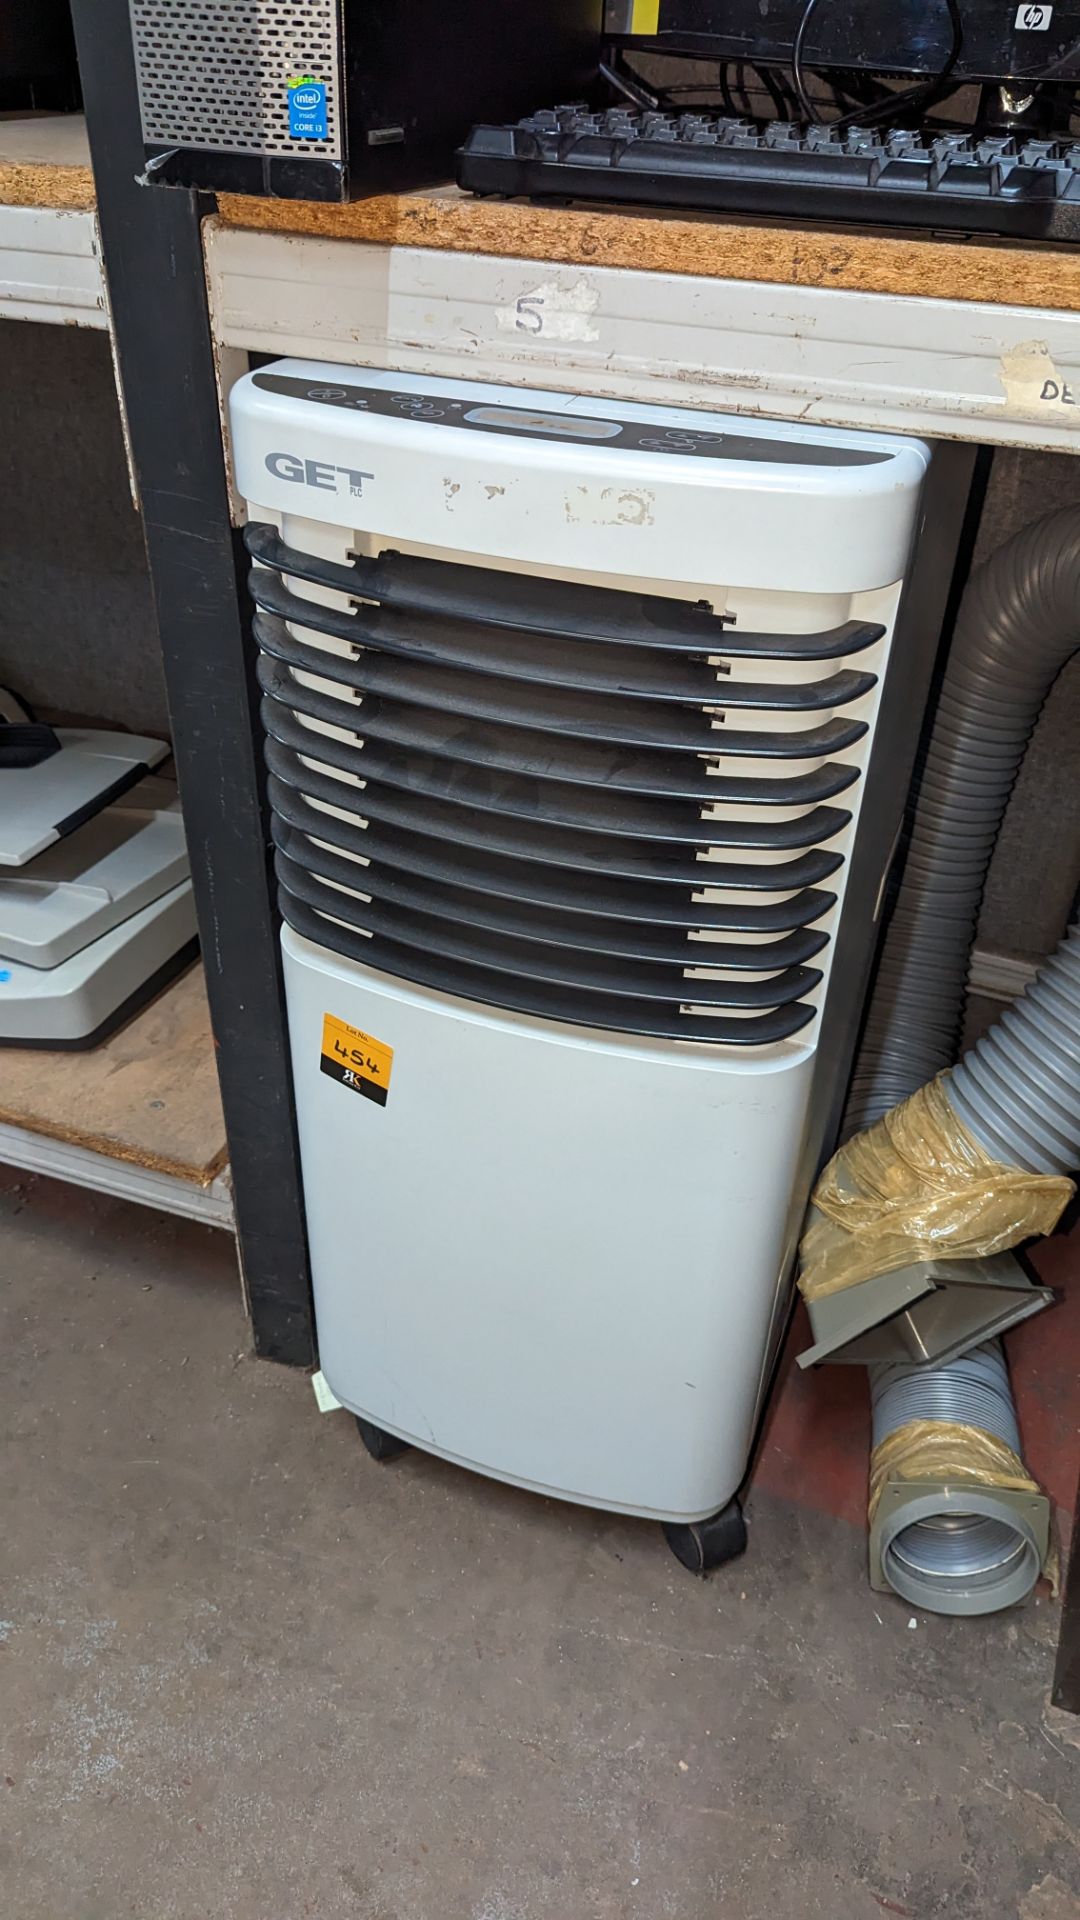 Get mobile air conditioning unit - Image 4 of 7